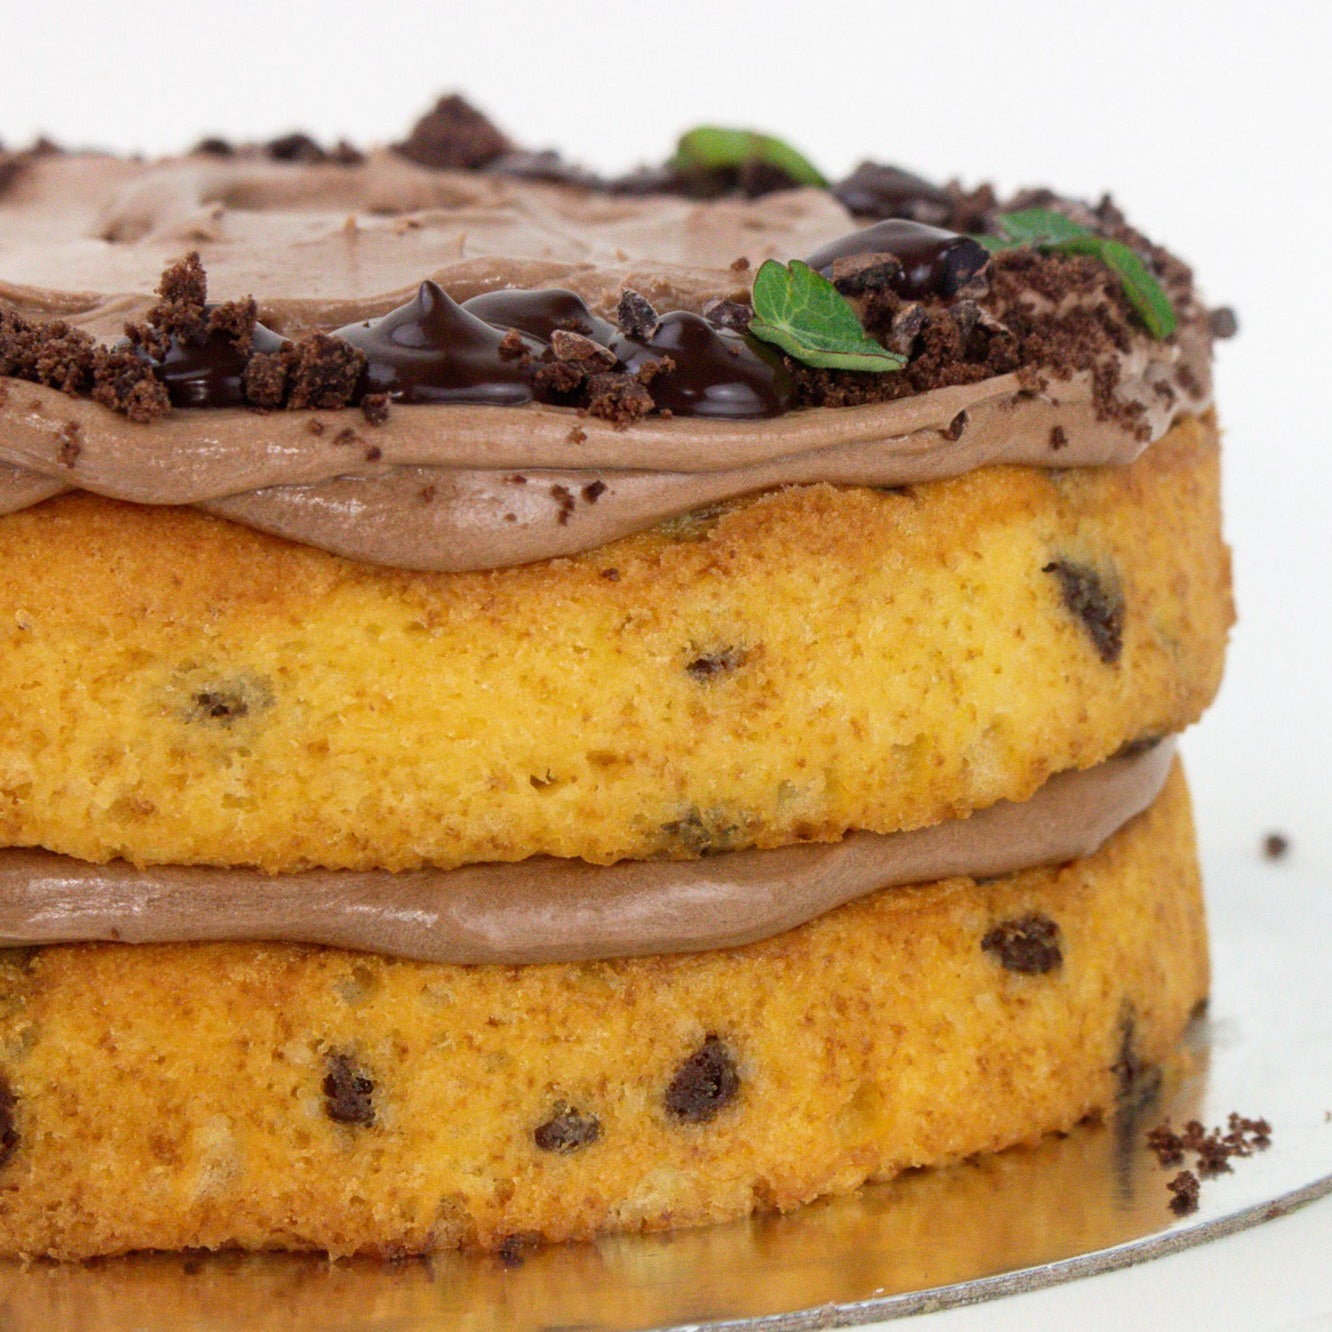 close up image of a two tiered vanilla cake with chocolate chips and a chocolate icing